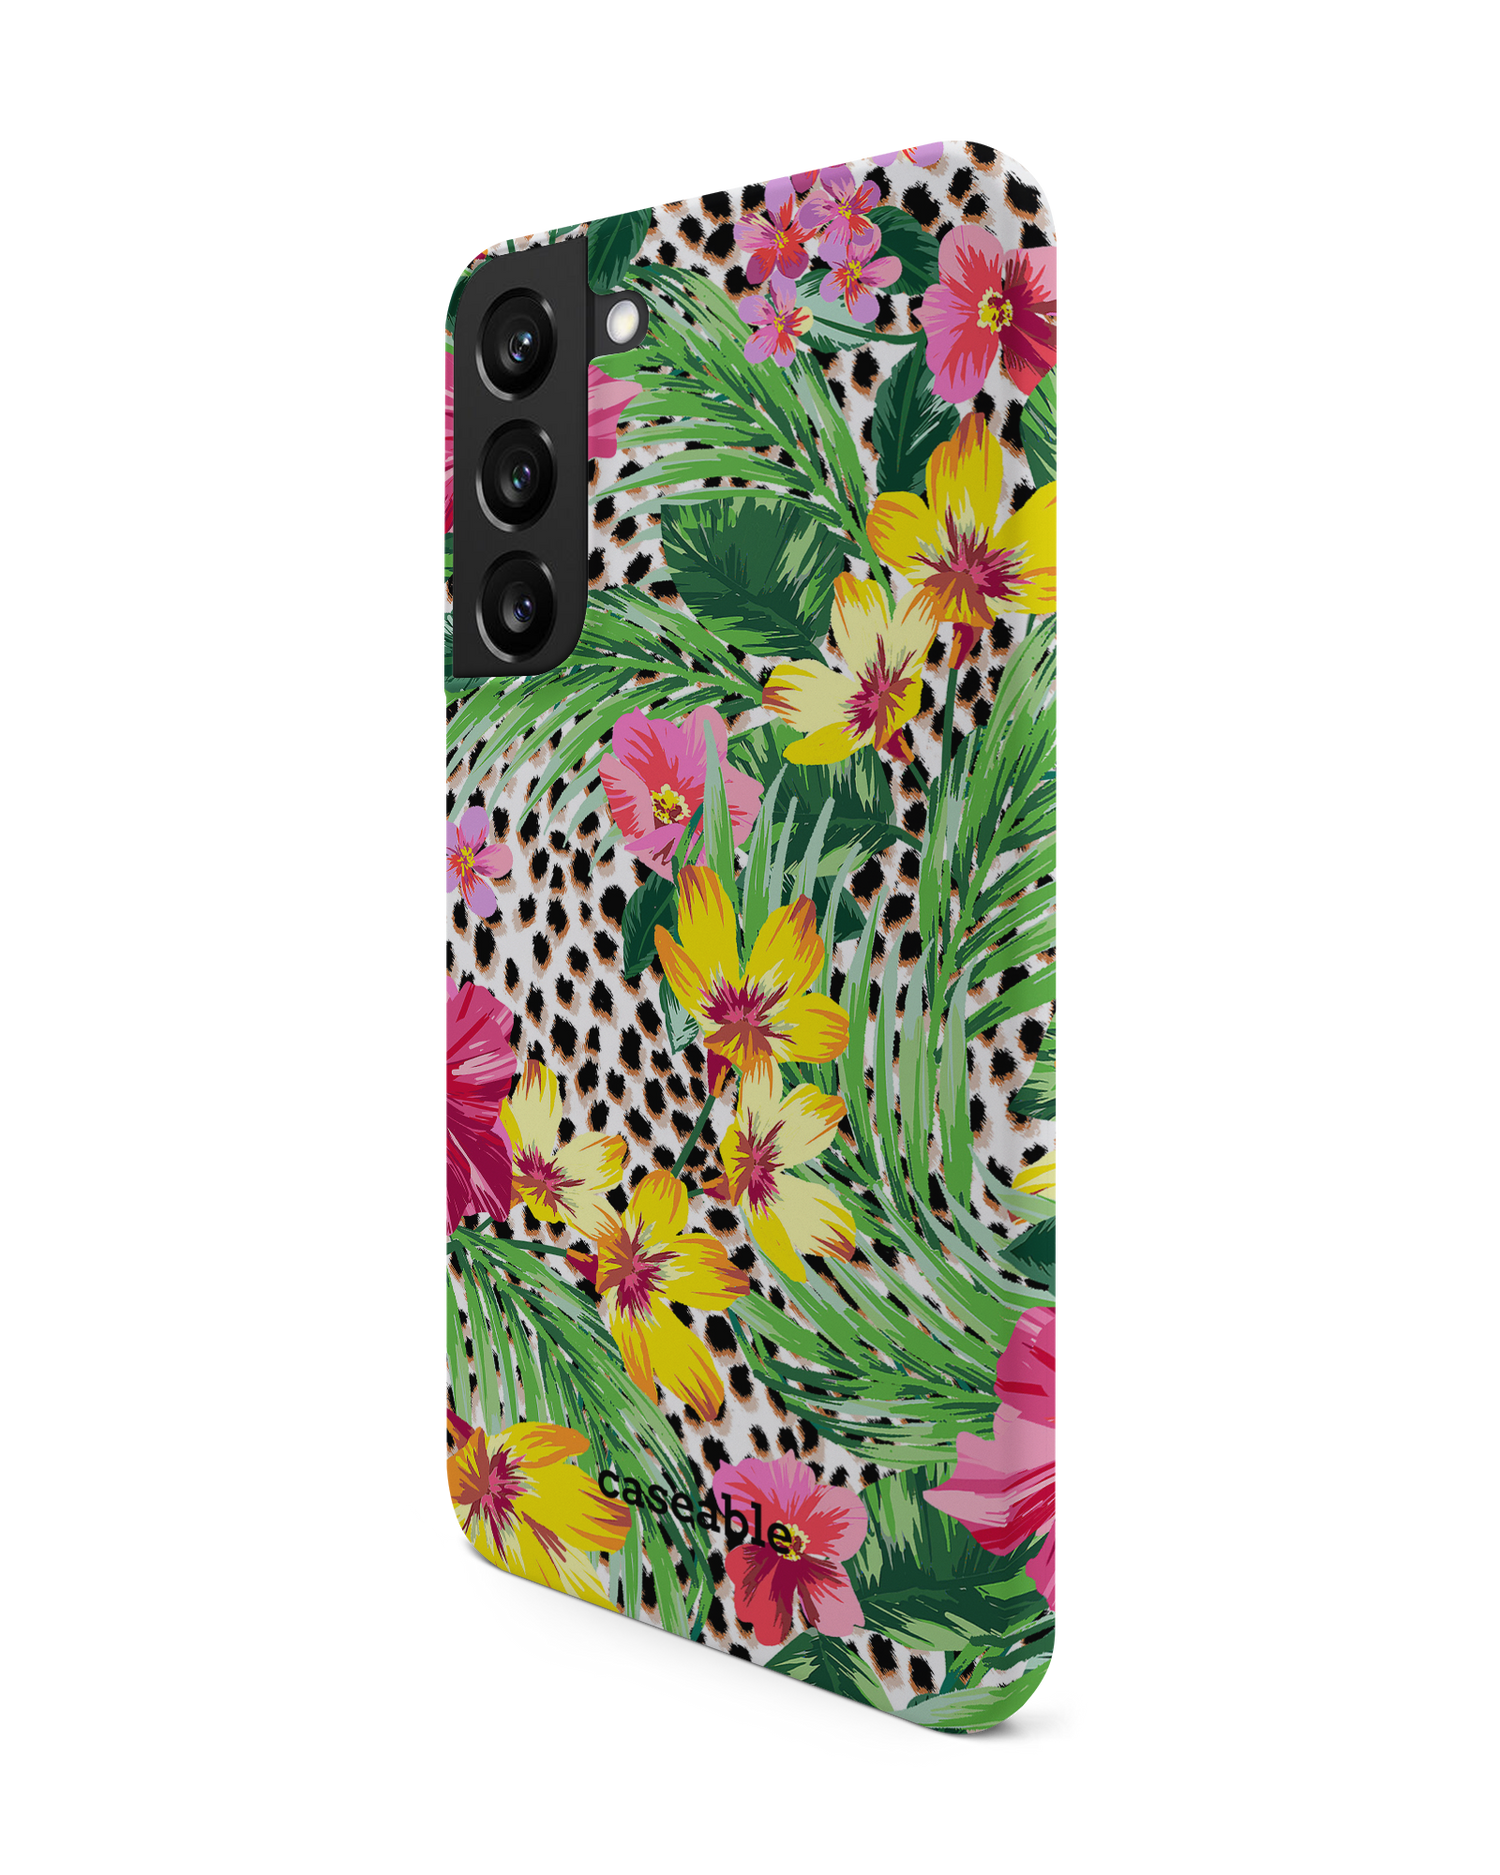 Tropical Cheetah Hard Shell Phone Case Samsung Galaxy S22 Plus 5G: View from the right side